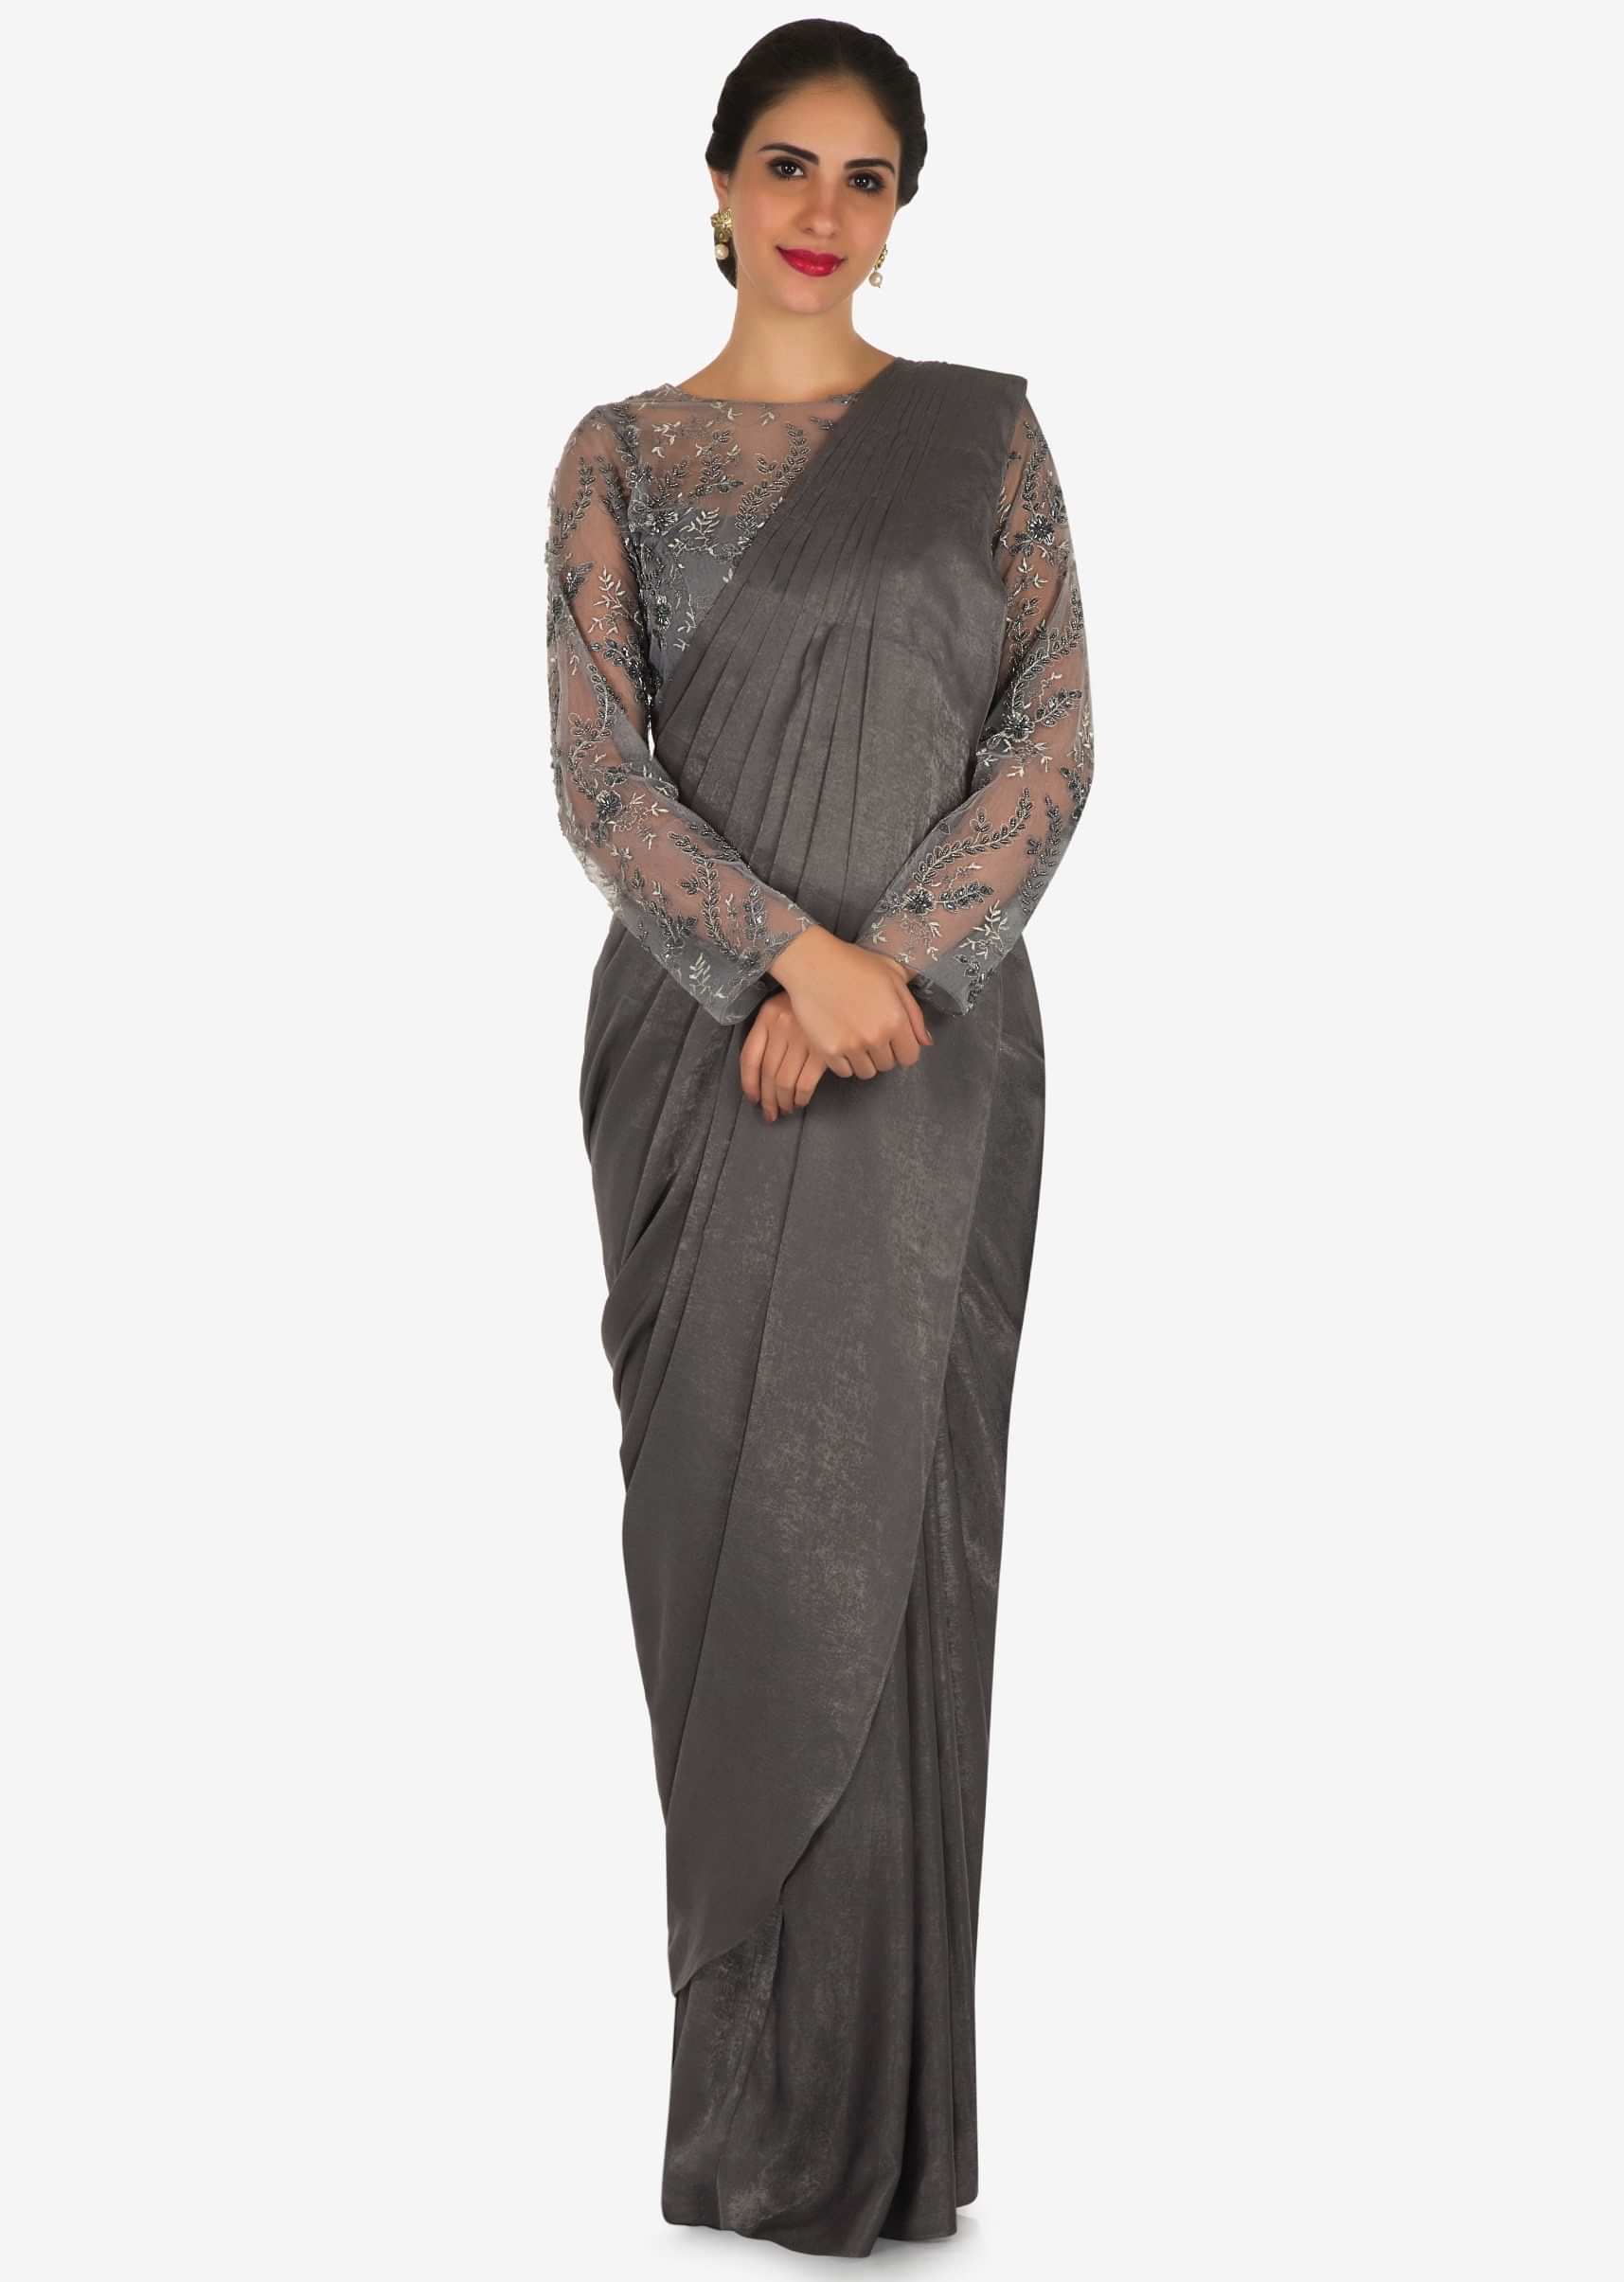 Grey ready pleated saree in velvet adorn in resham and zari embroidered work only on Kalki